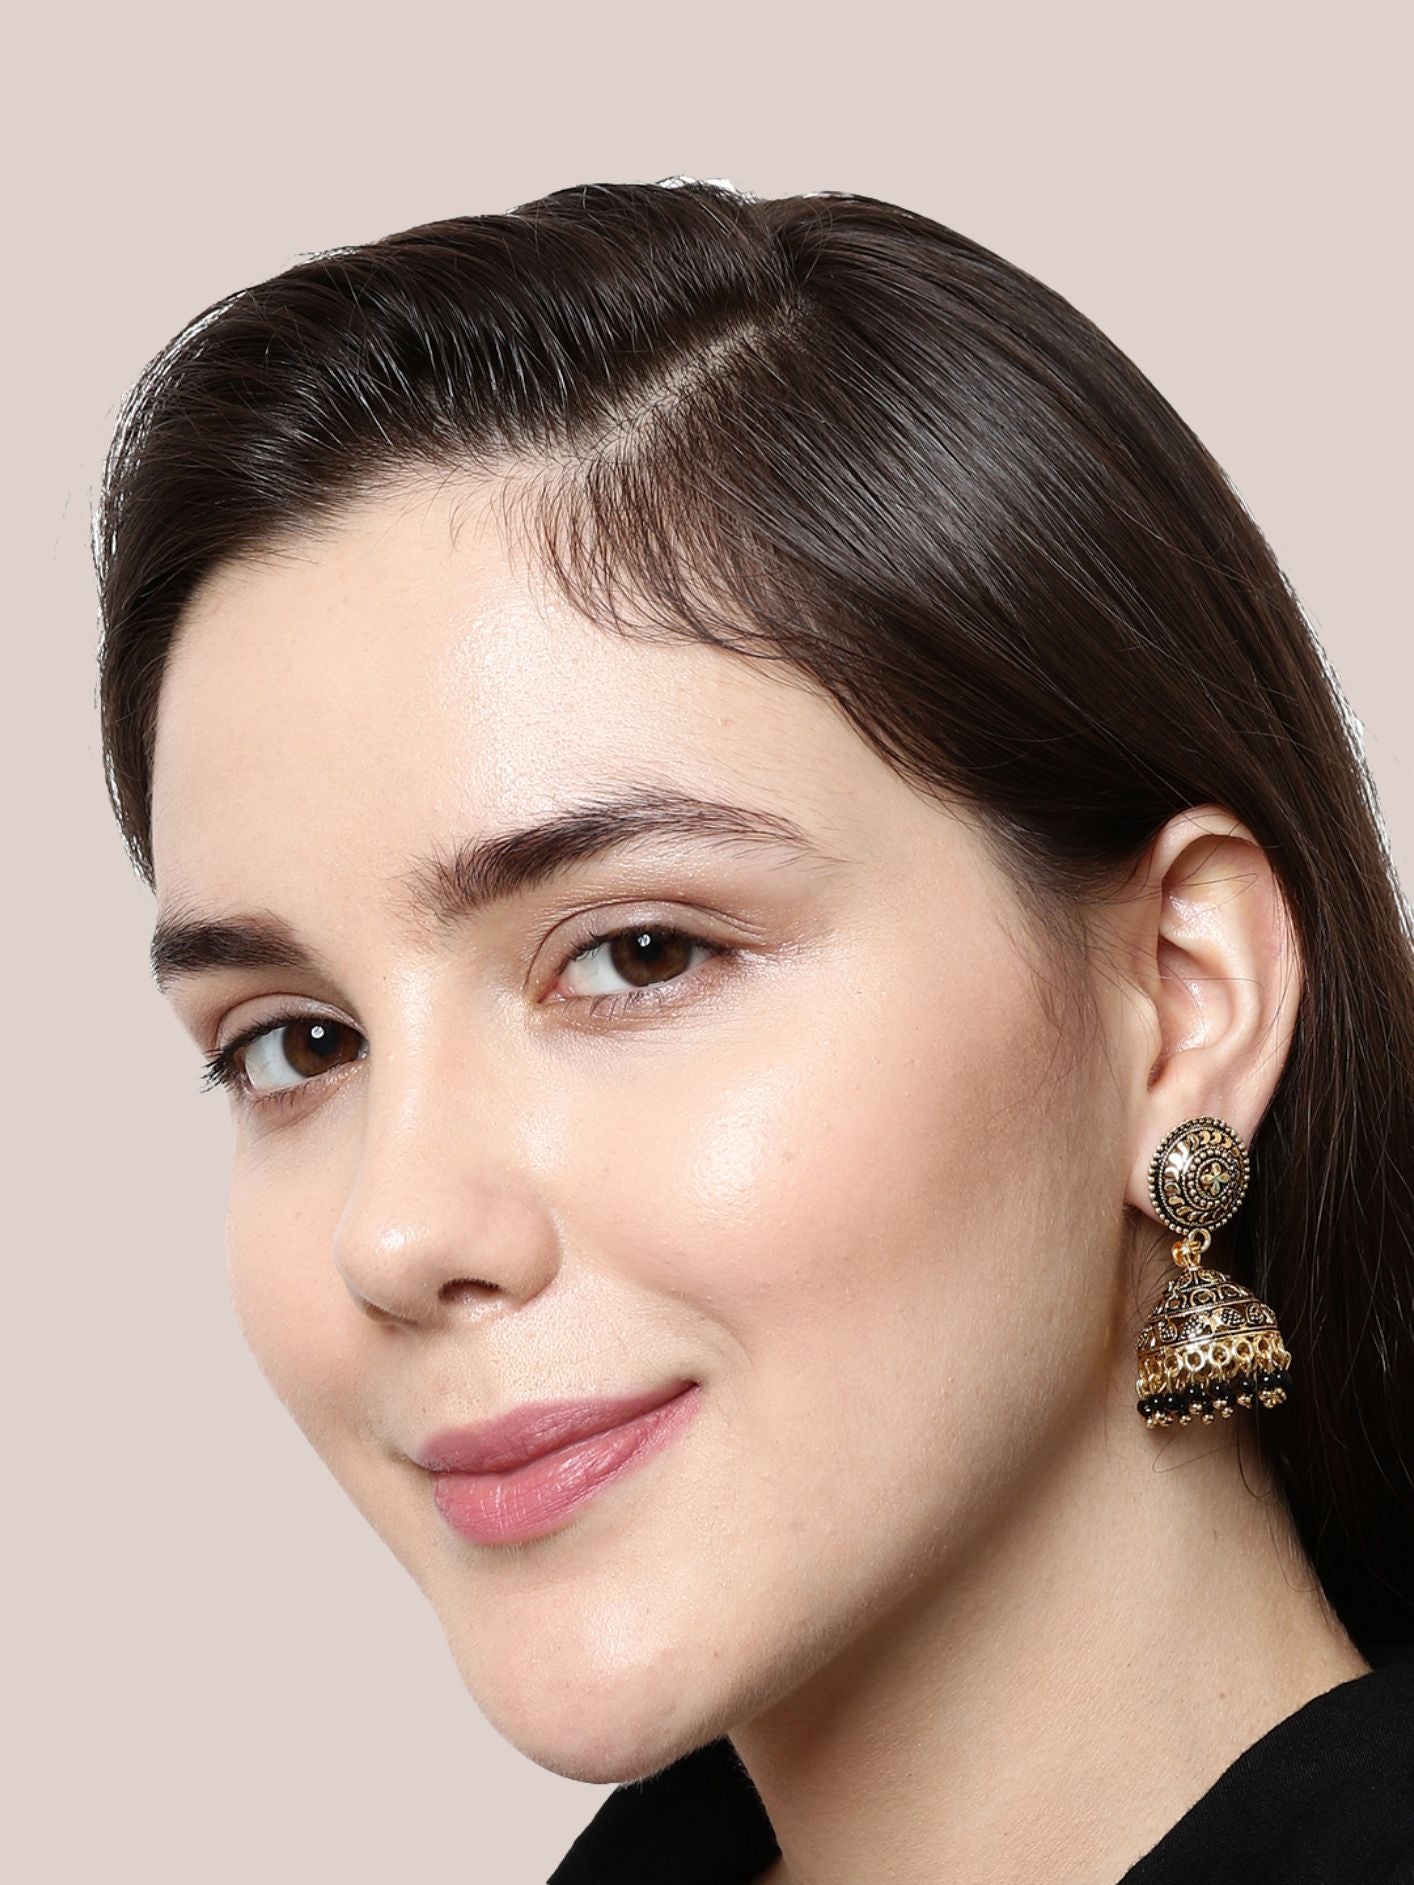 Women's Black & Gold-Plated Enamelled Dome Shaped Jhumkas - Anikas Creation